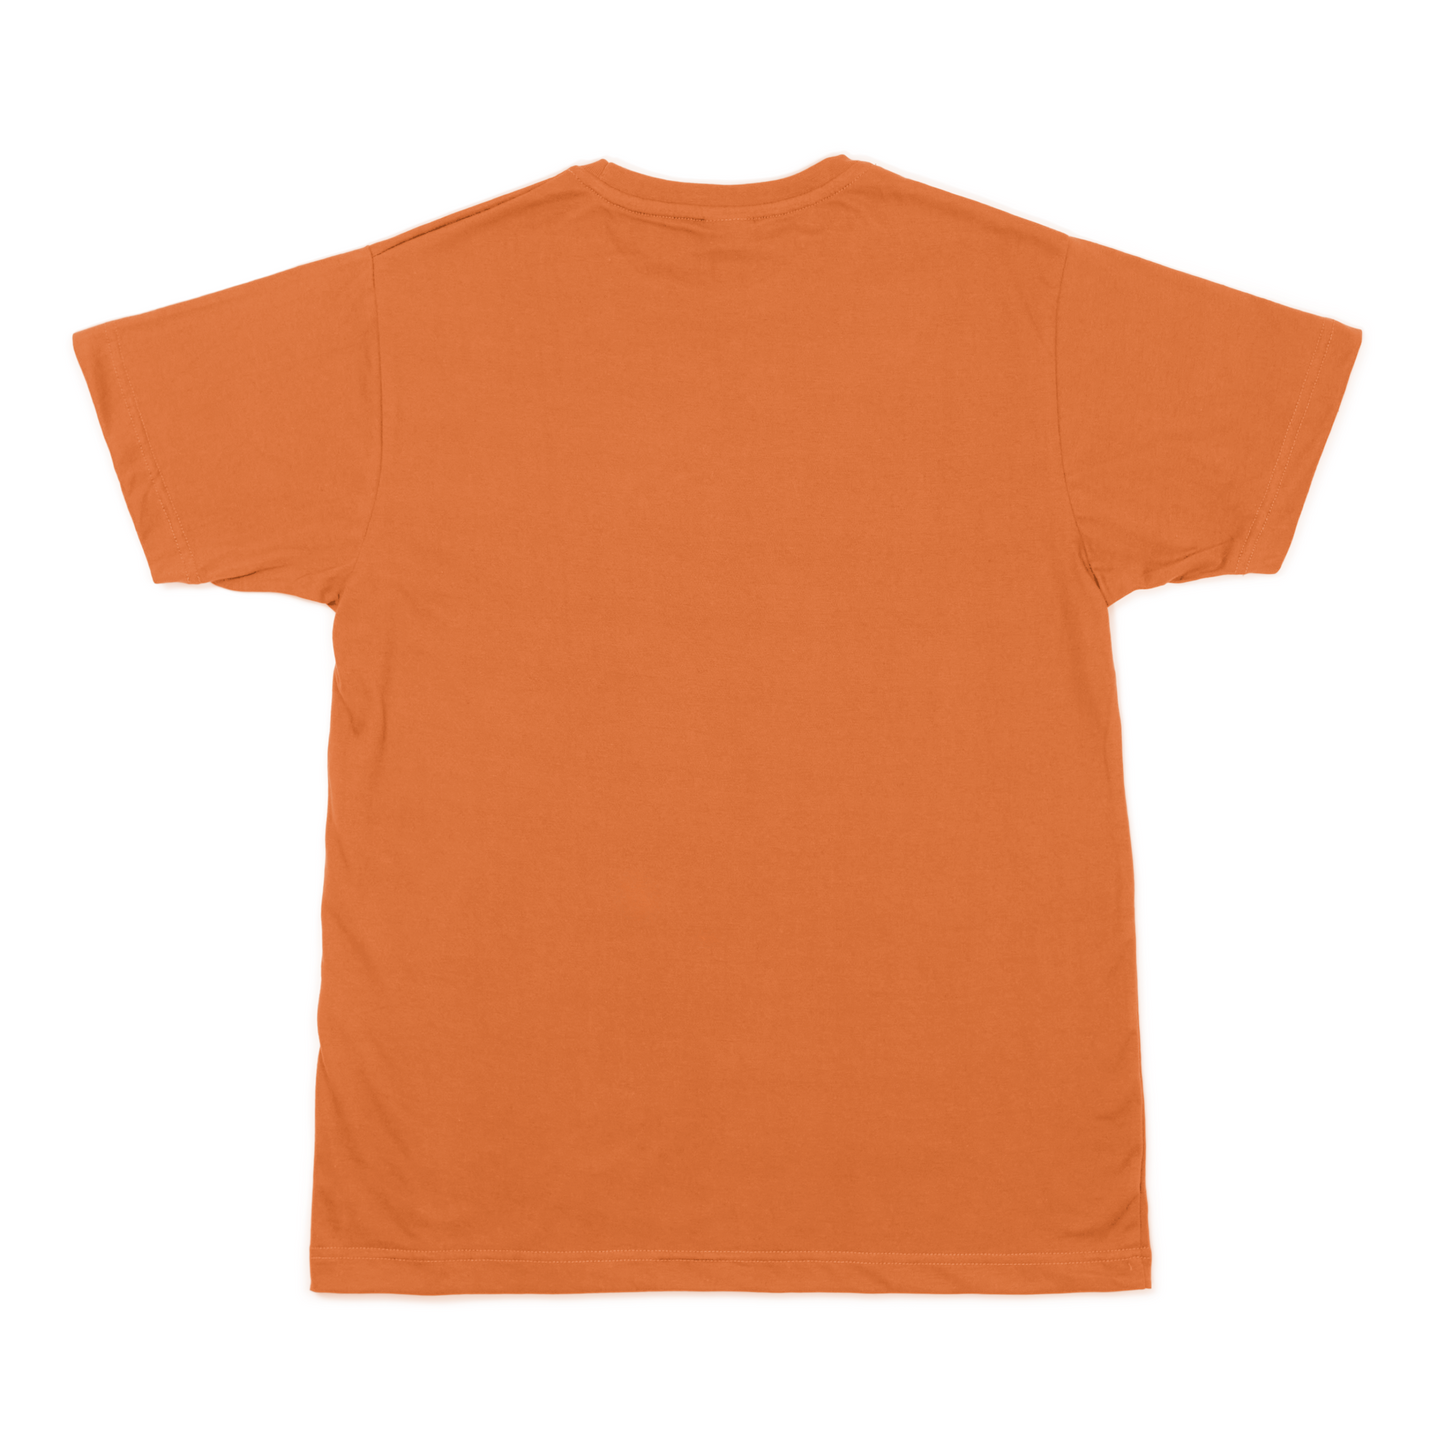 Relaxed Fit Hemp Tee - Salmon